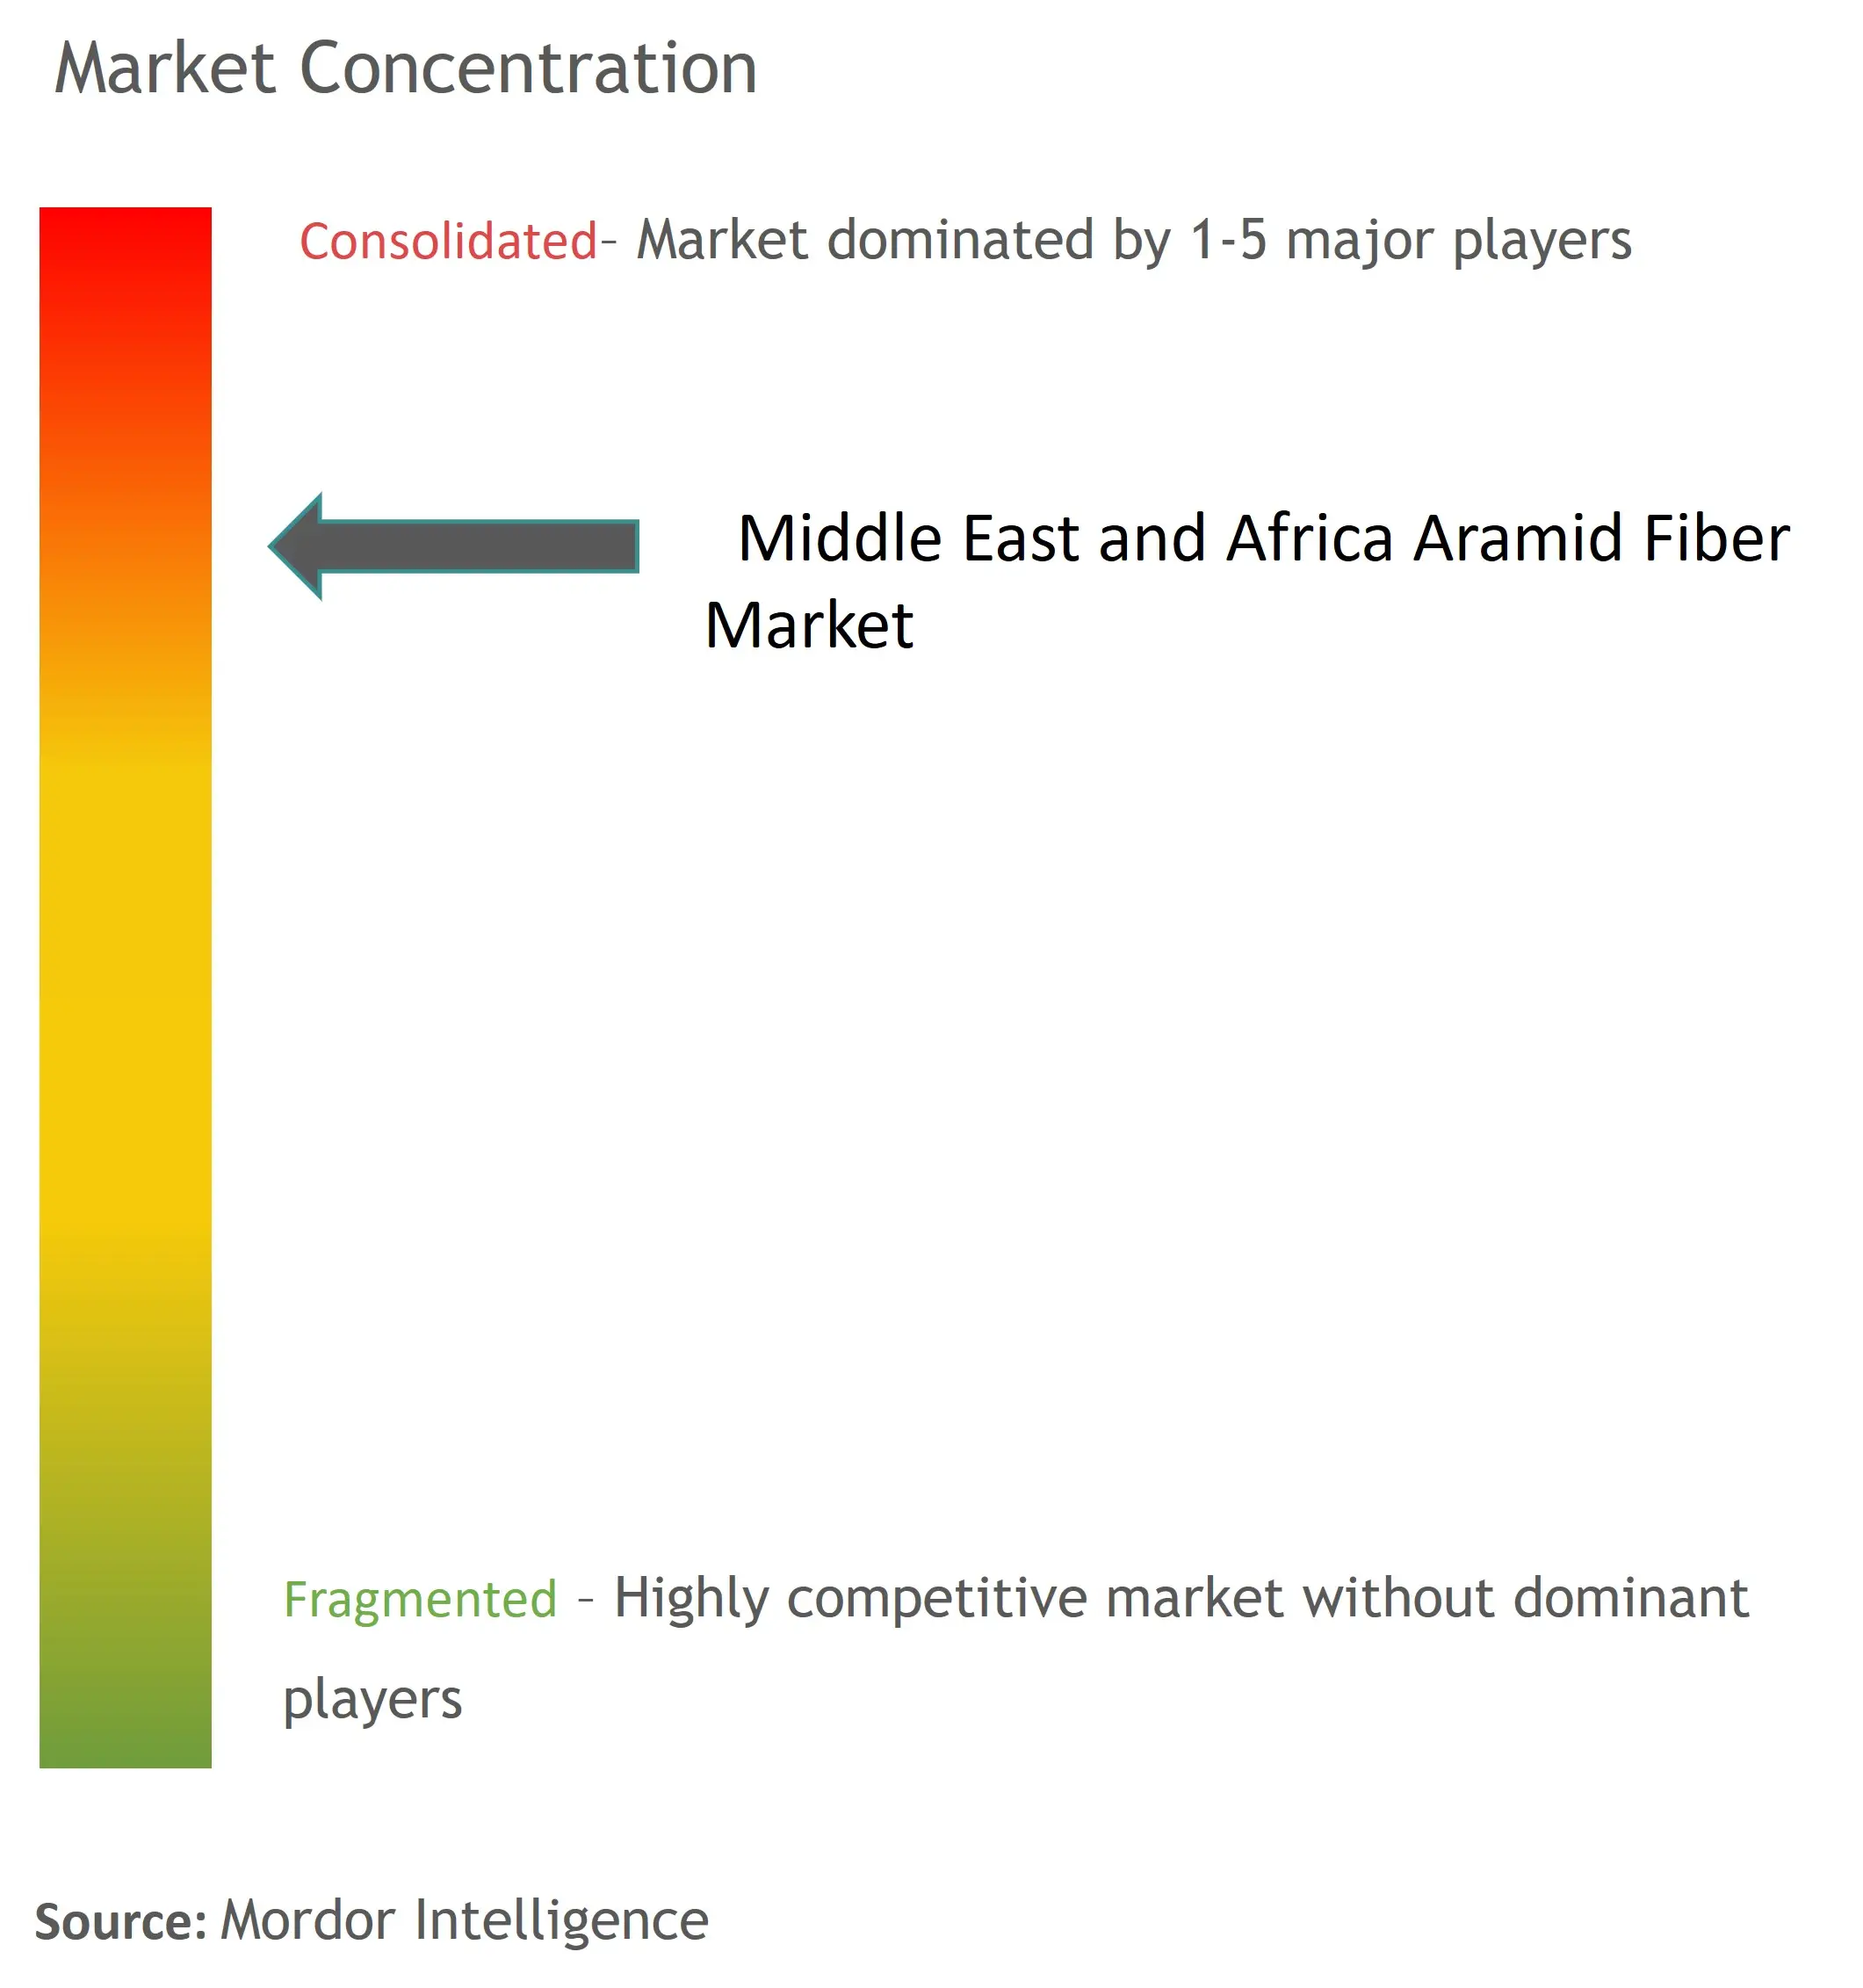 Middle East And Africa Aramid Fiber Market Concentration